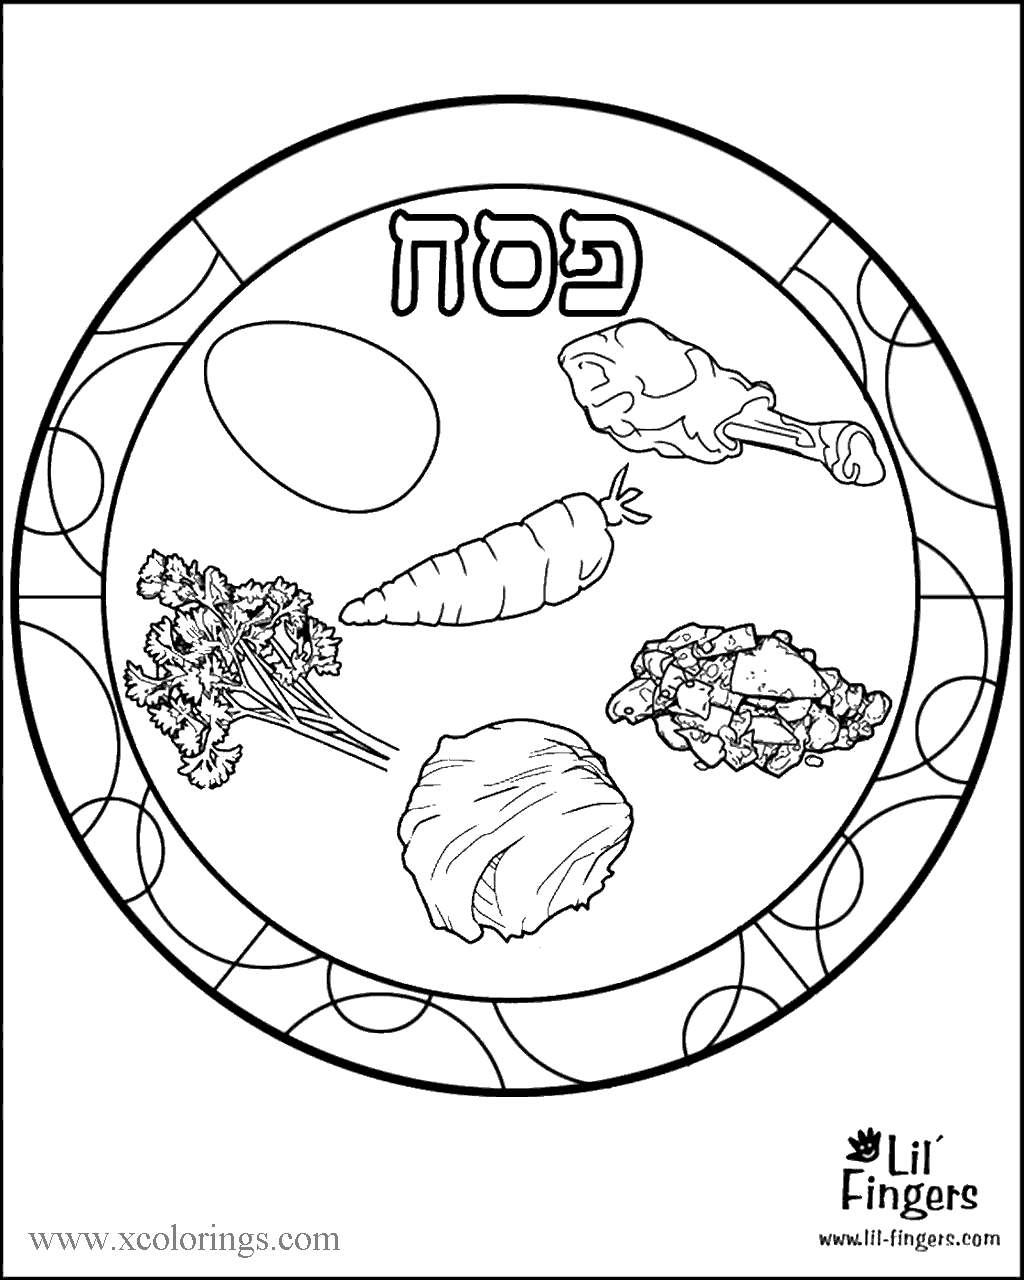 Free Passover Seder Coloring Pages printable